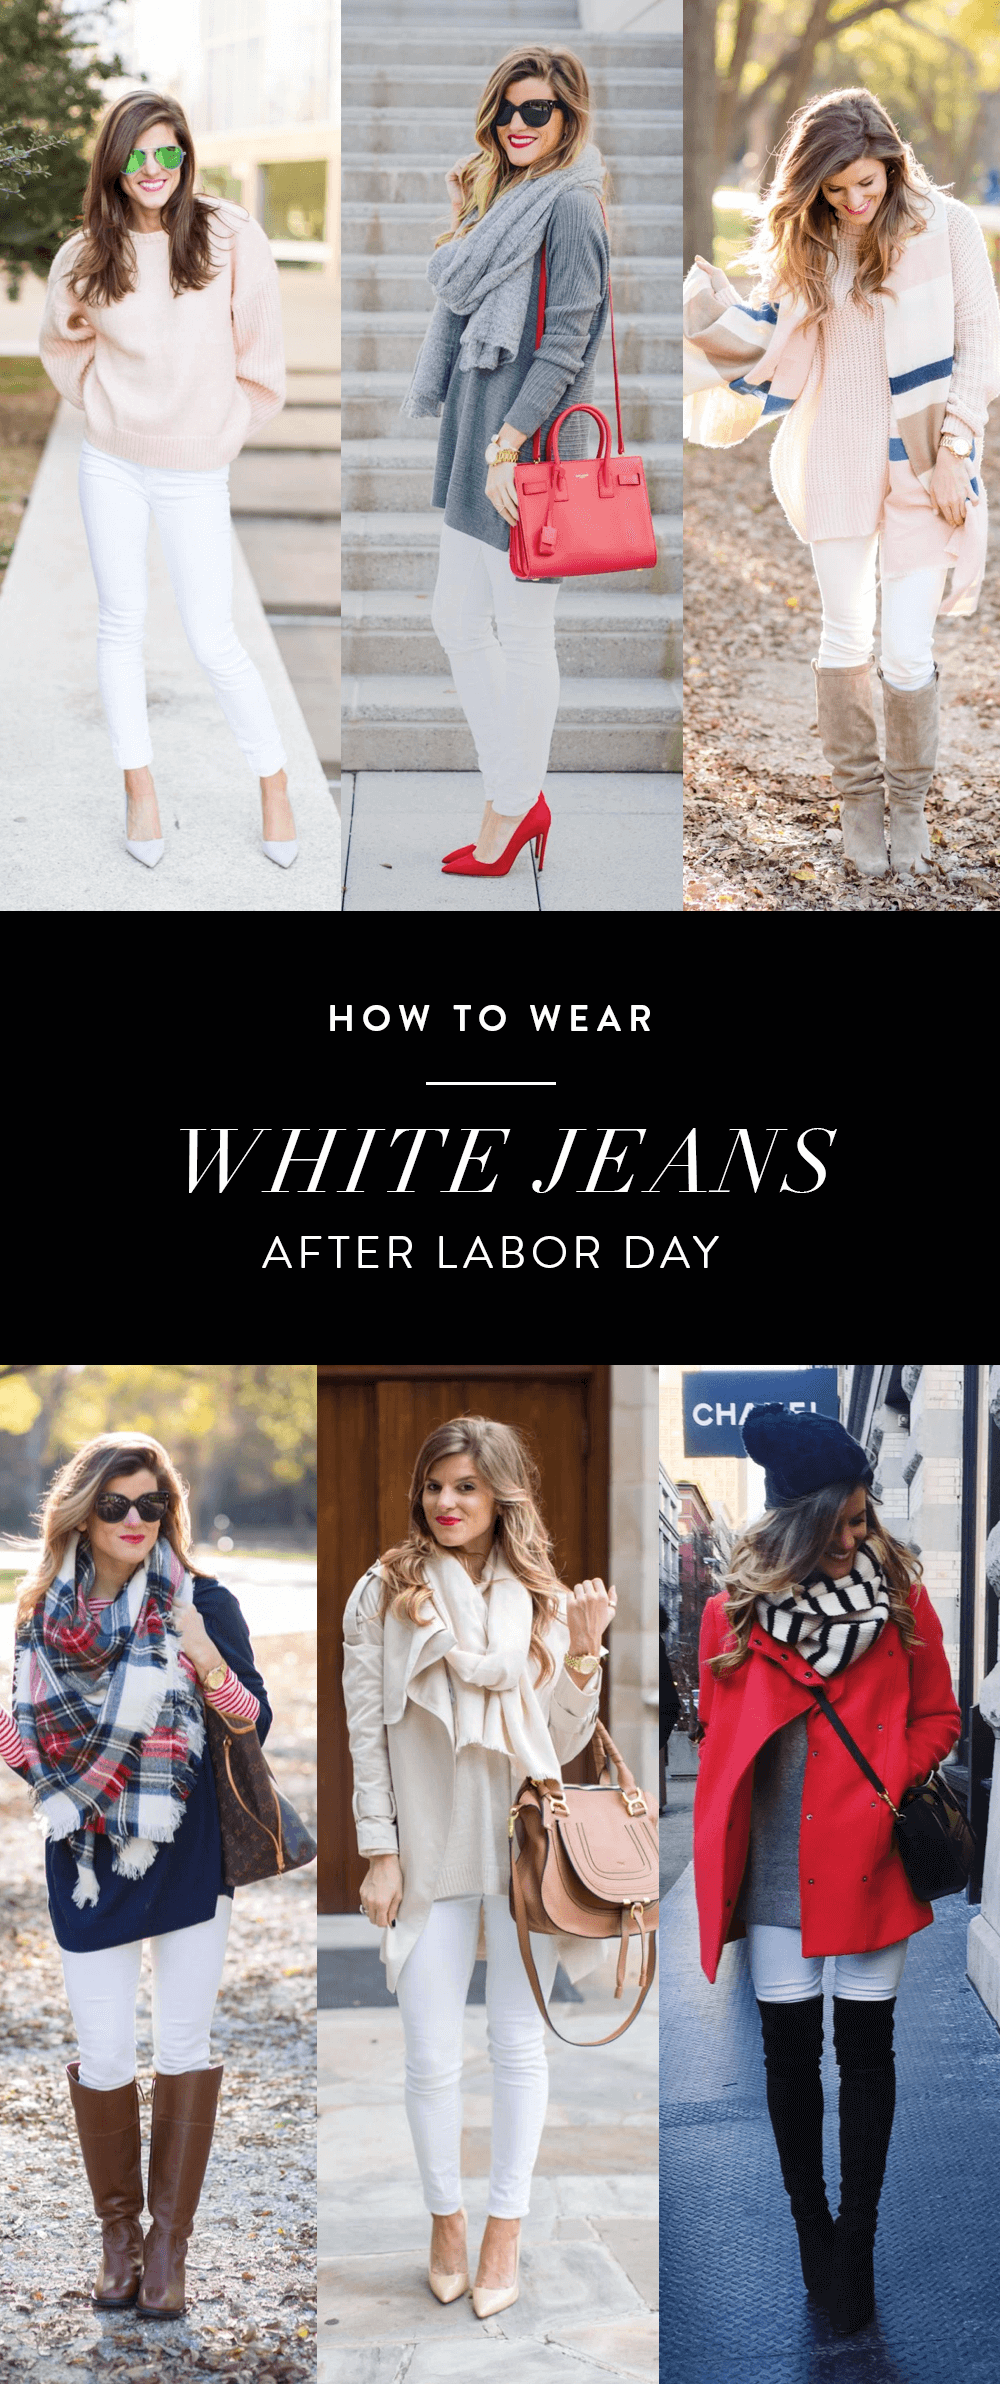 Answering ALL your questions regarding How To Wear White Jeans After Labor Day, what to wear with white jeans after labor day, and everything you want to know about wearing white jeans after labor day